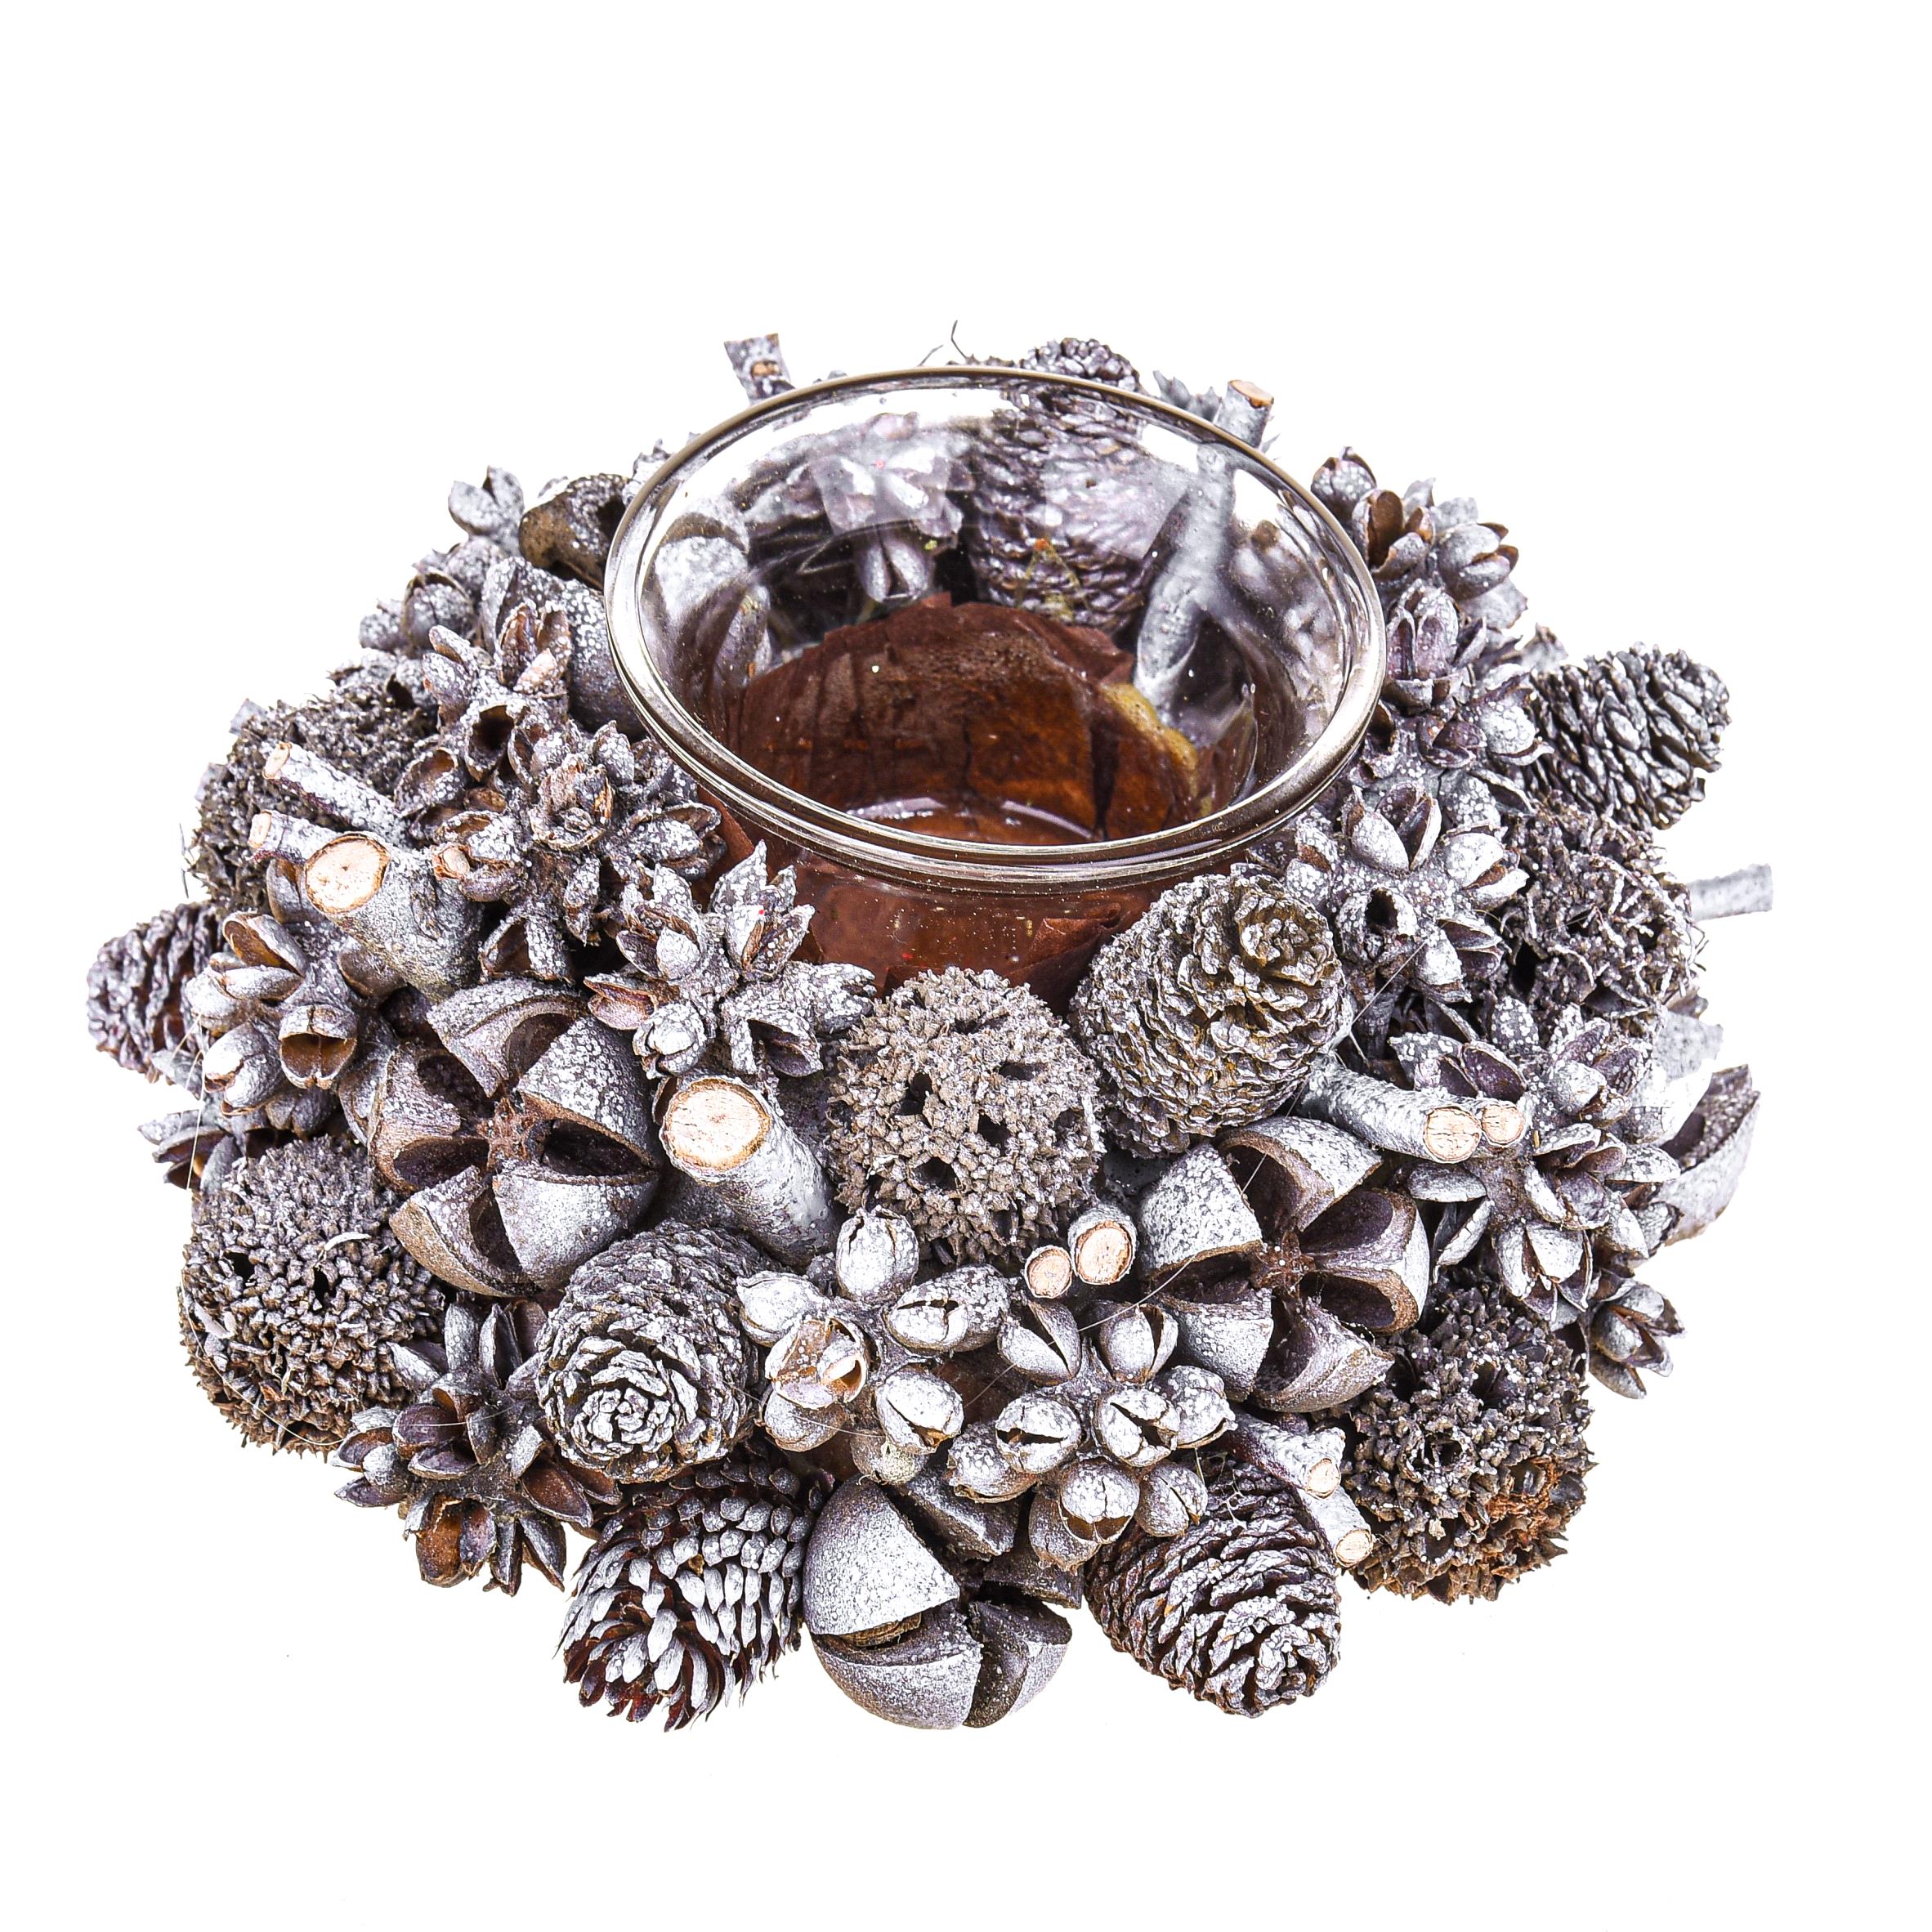 Home decors and accessories,P/CANDELA 15 CM NATALE C/DRY FRUITS